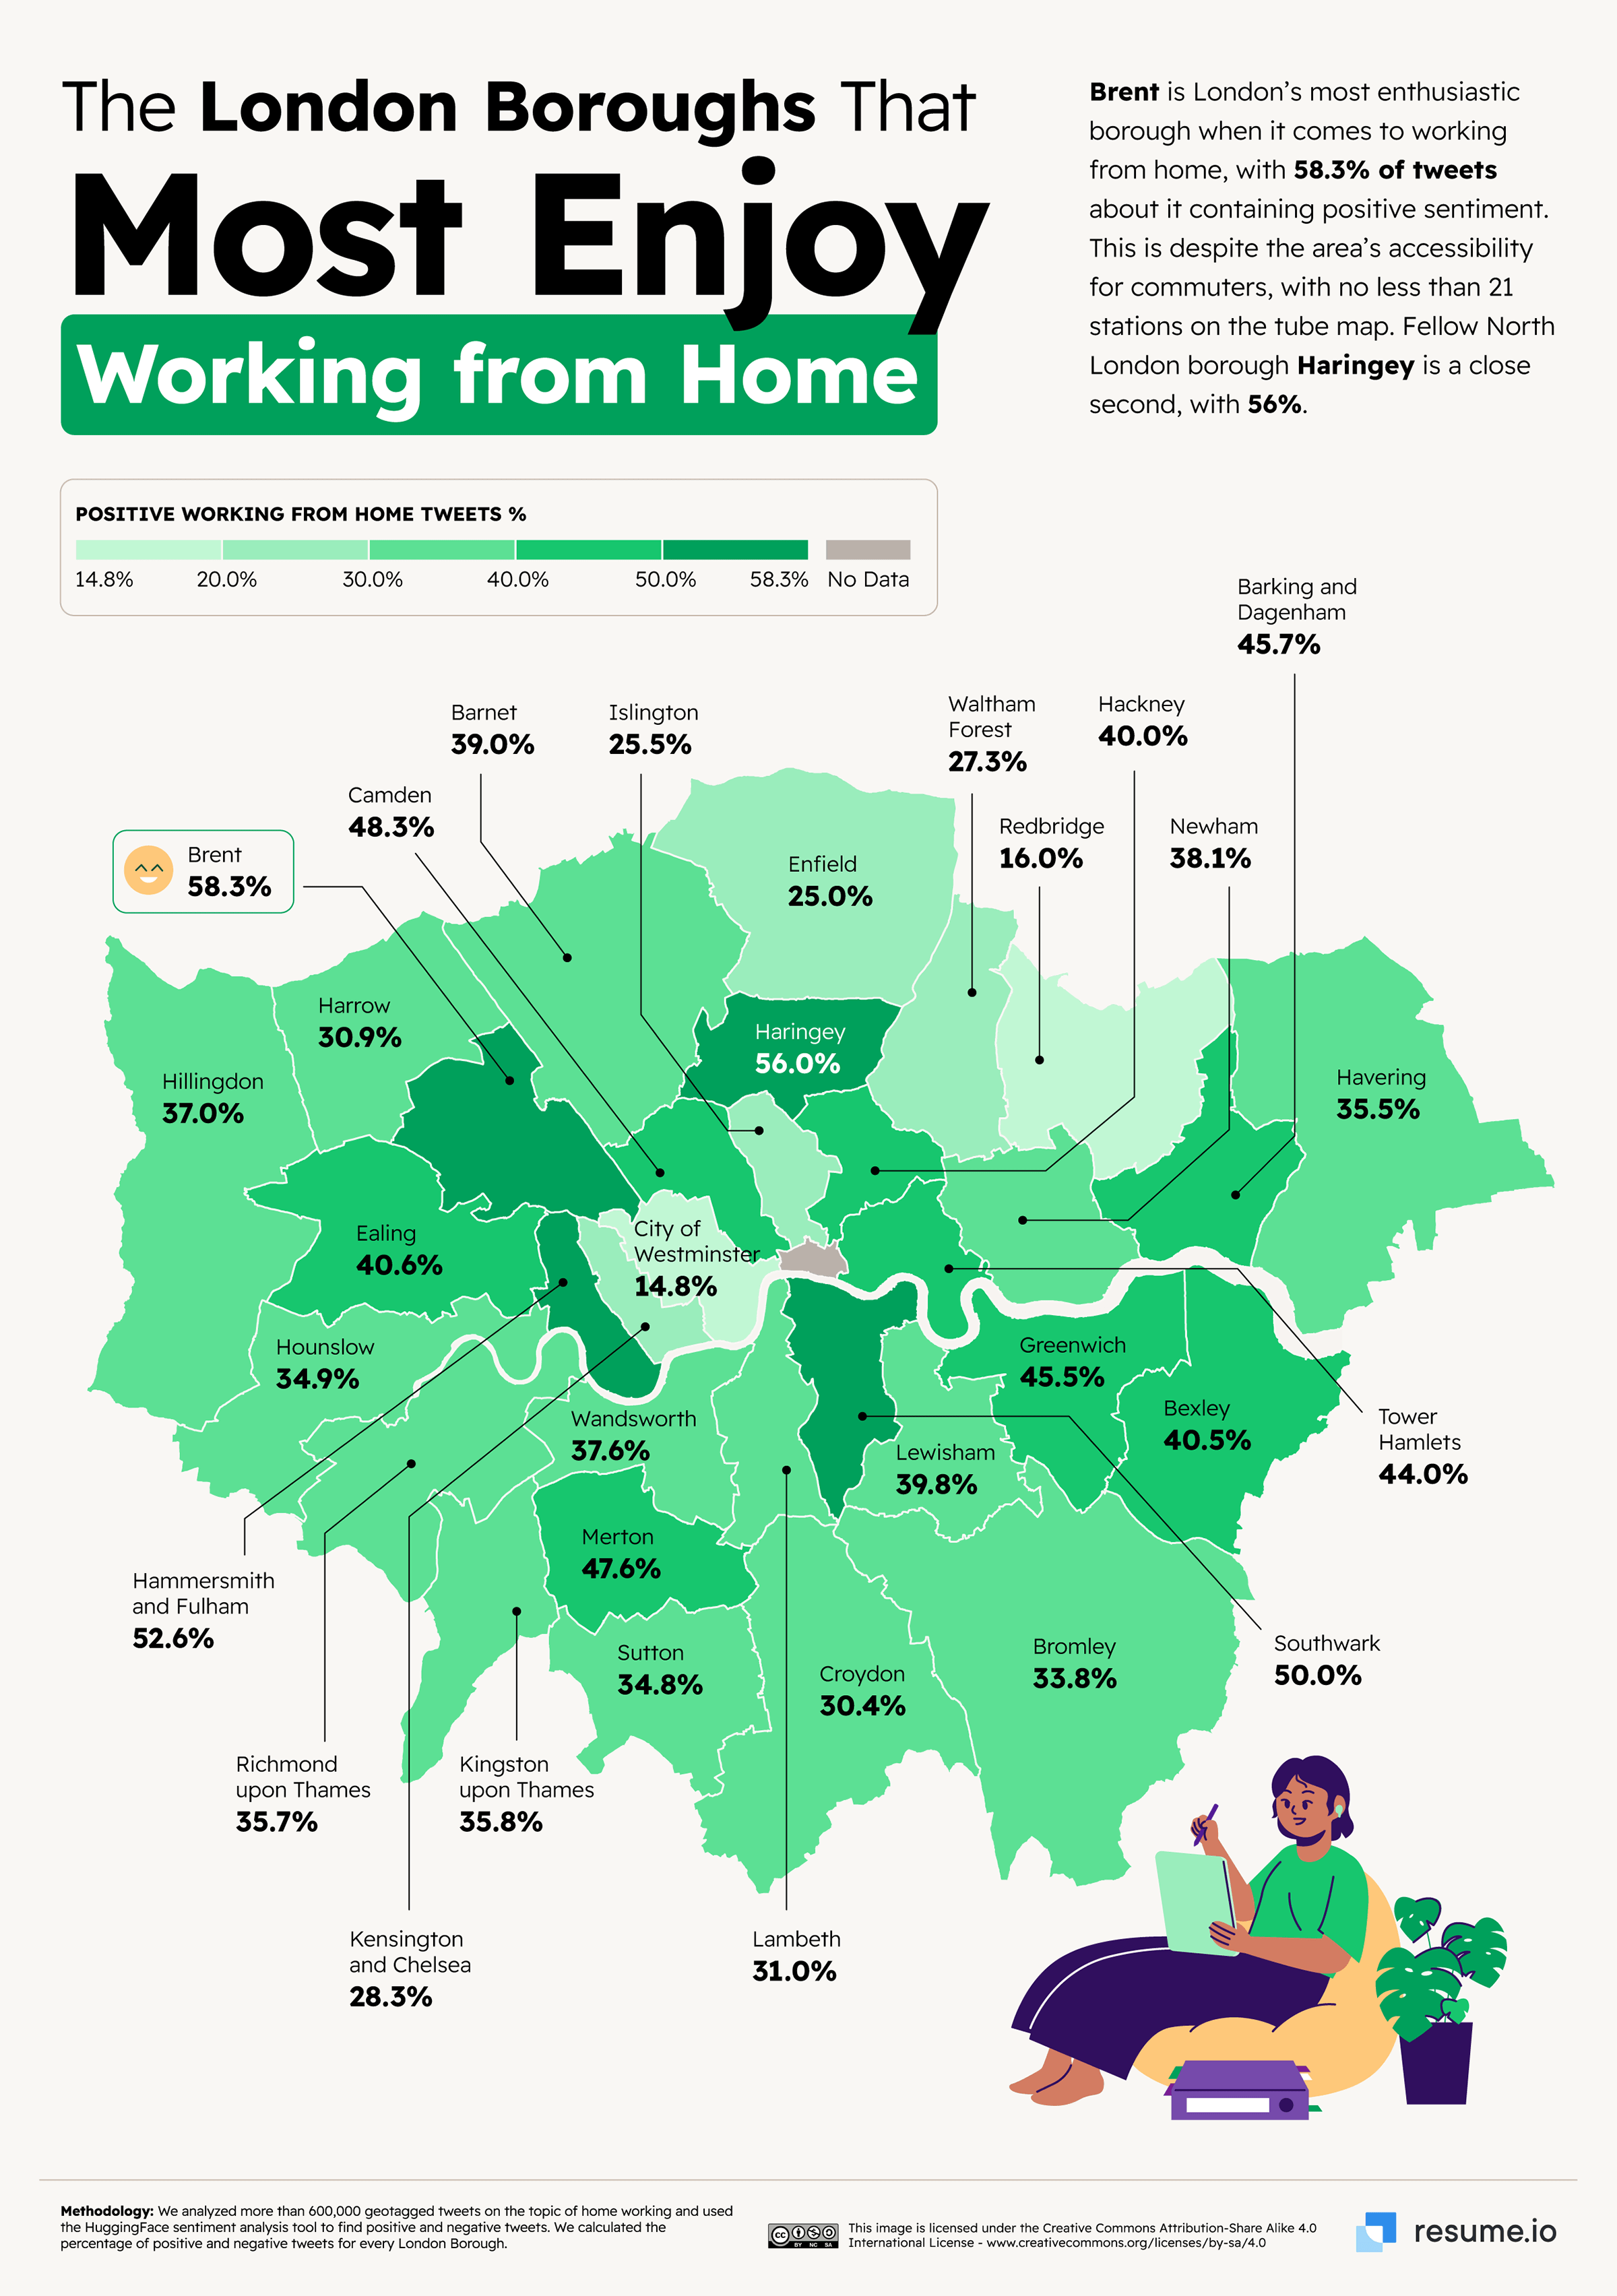 The London Boroughs that most enjoy working from home. 